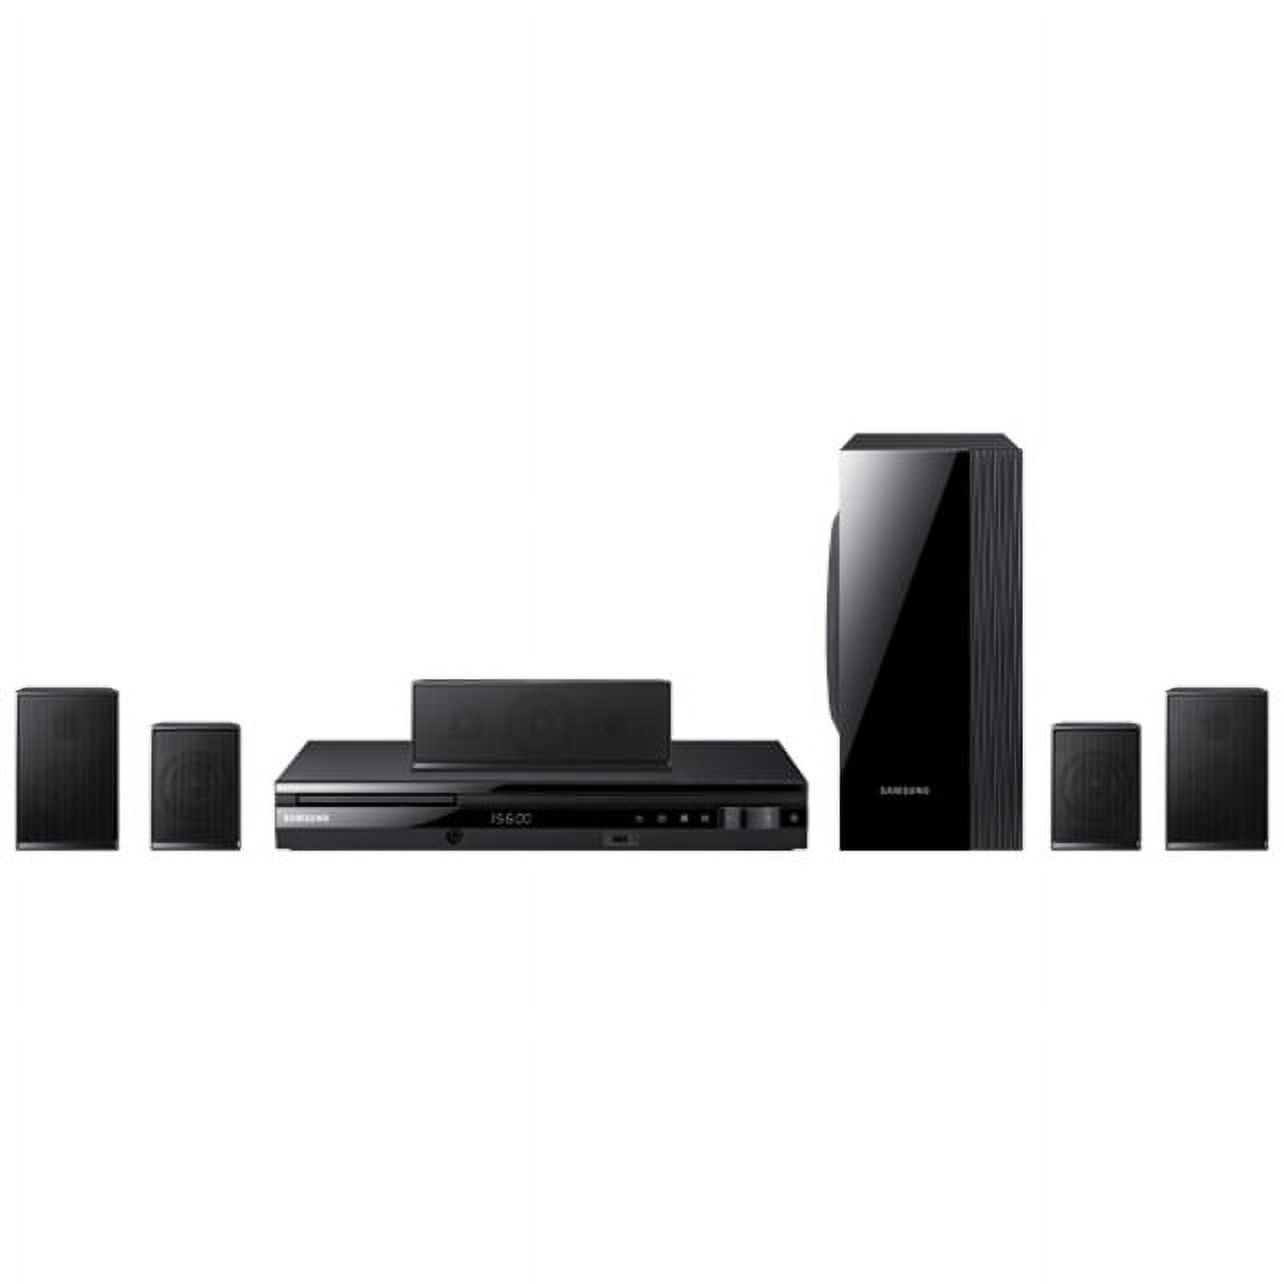 Samsung HT-E550 5.1 Home Theater System, 1000 W RMS, DVD Player - image 1 of 4